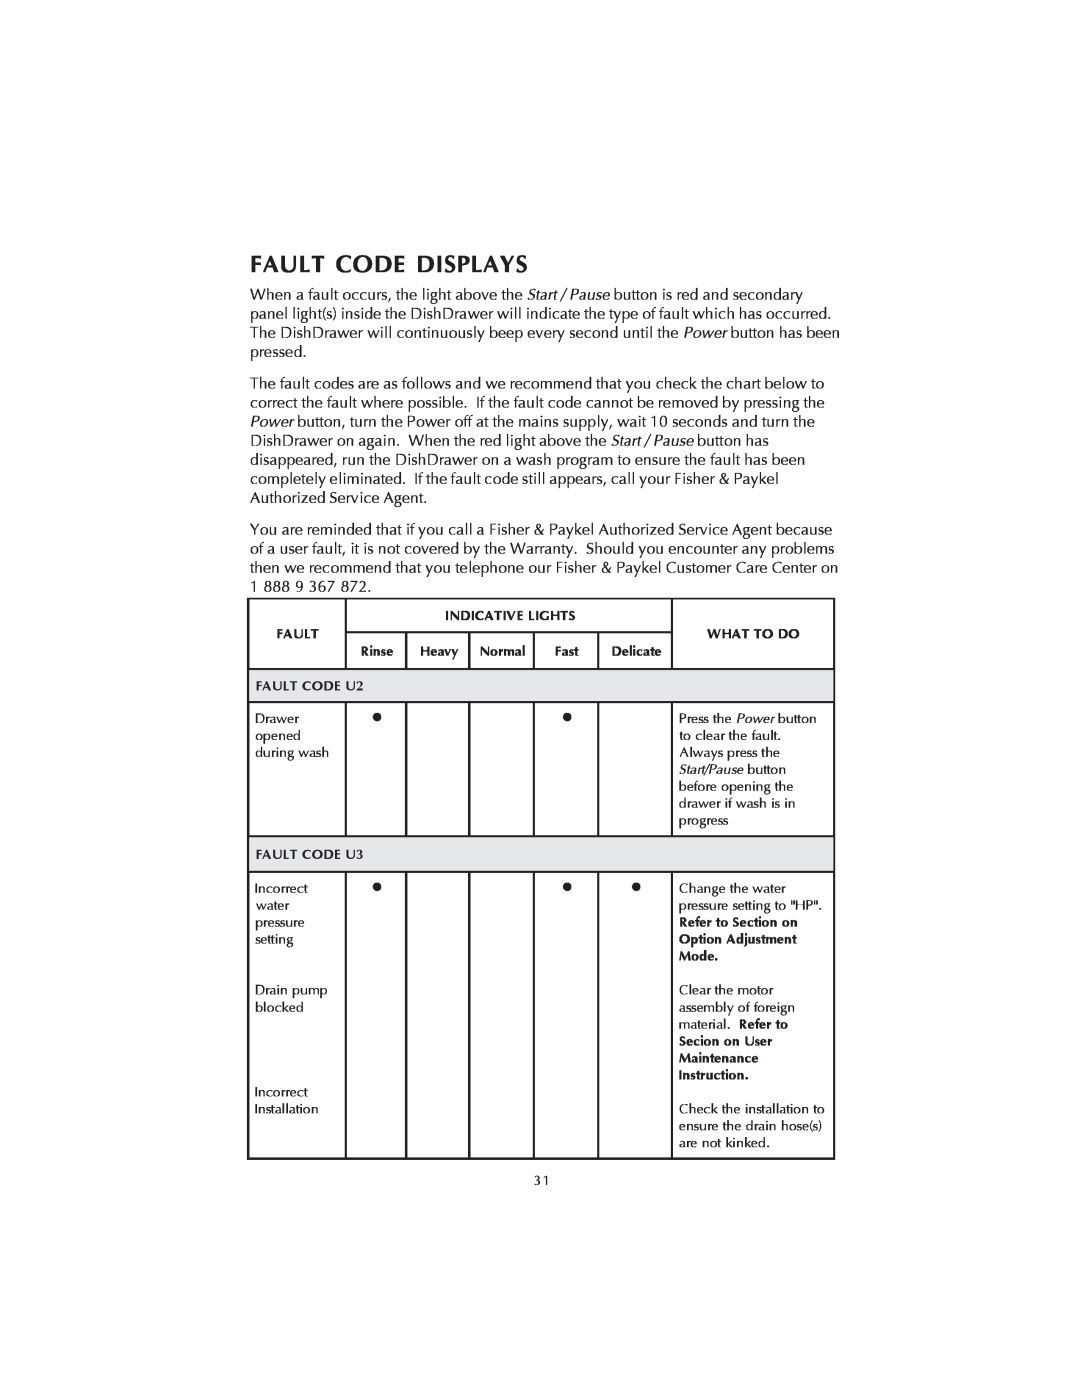 Fisher & Paykel DS602 manual Fault Code Displays 